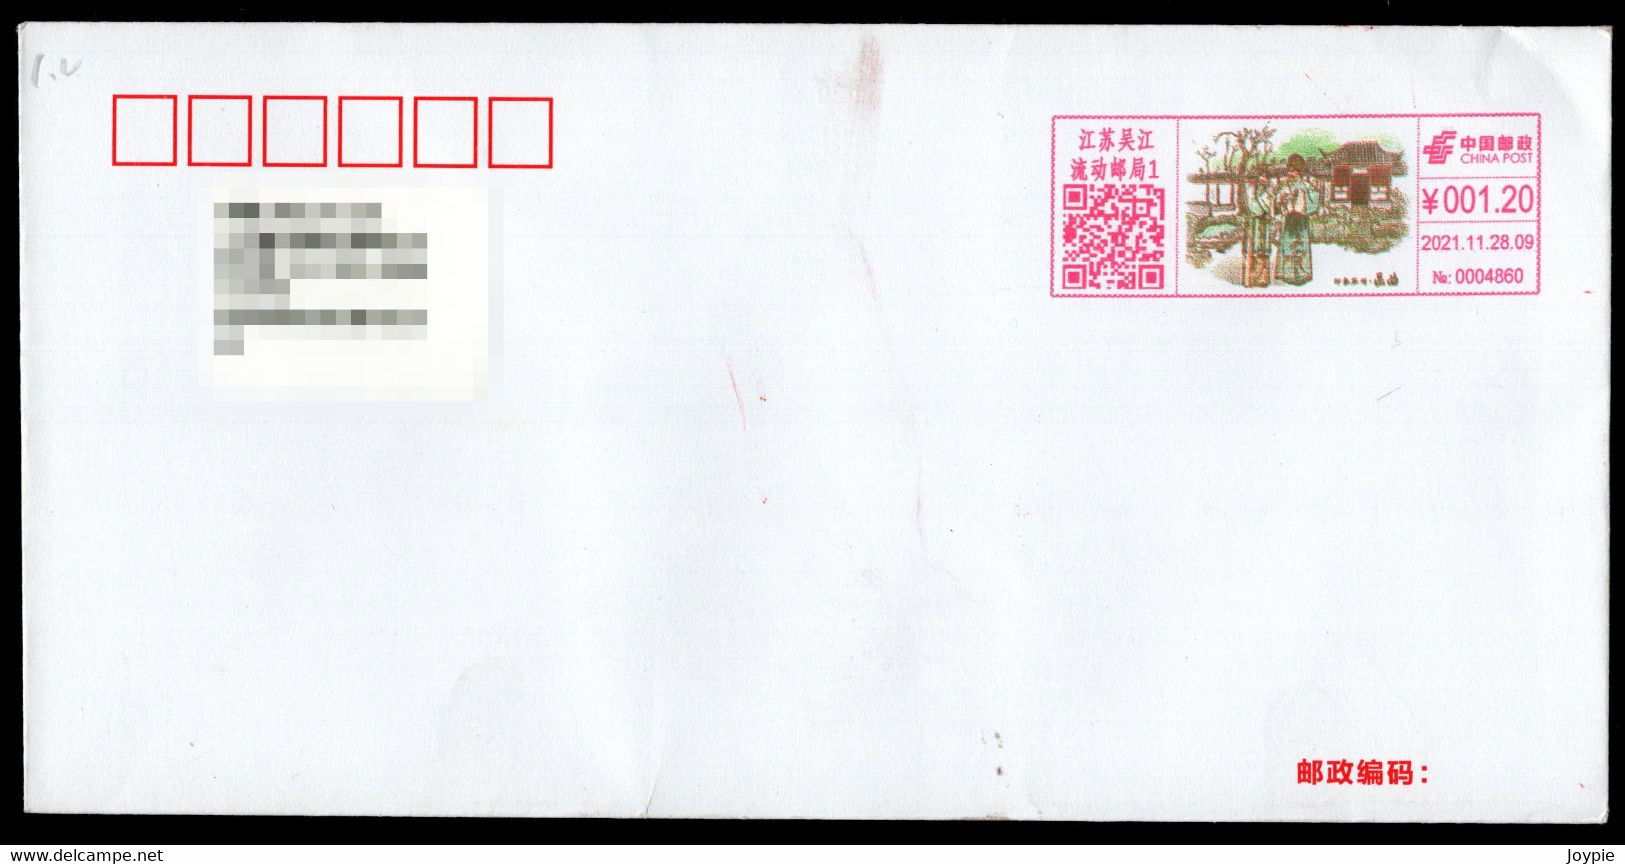 China Color Postage Meter: Kunqu Opera. Postally Circulated FDC - Covers & Documents